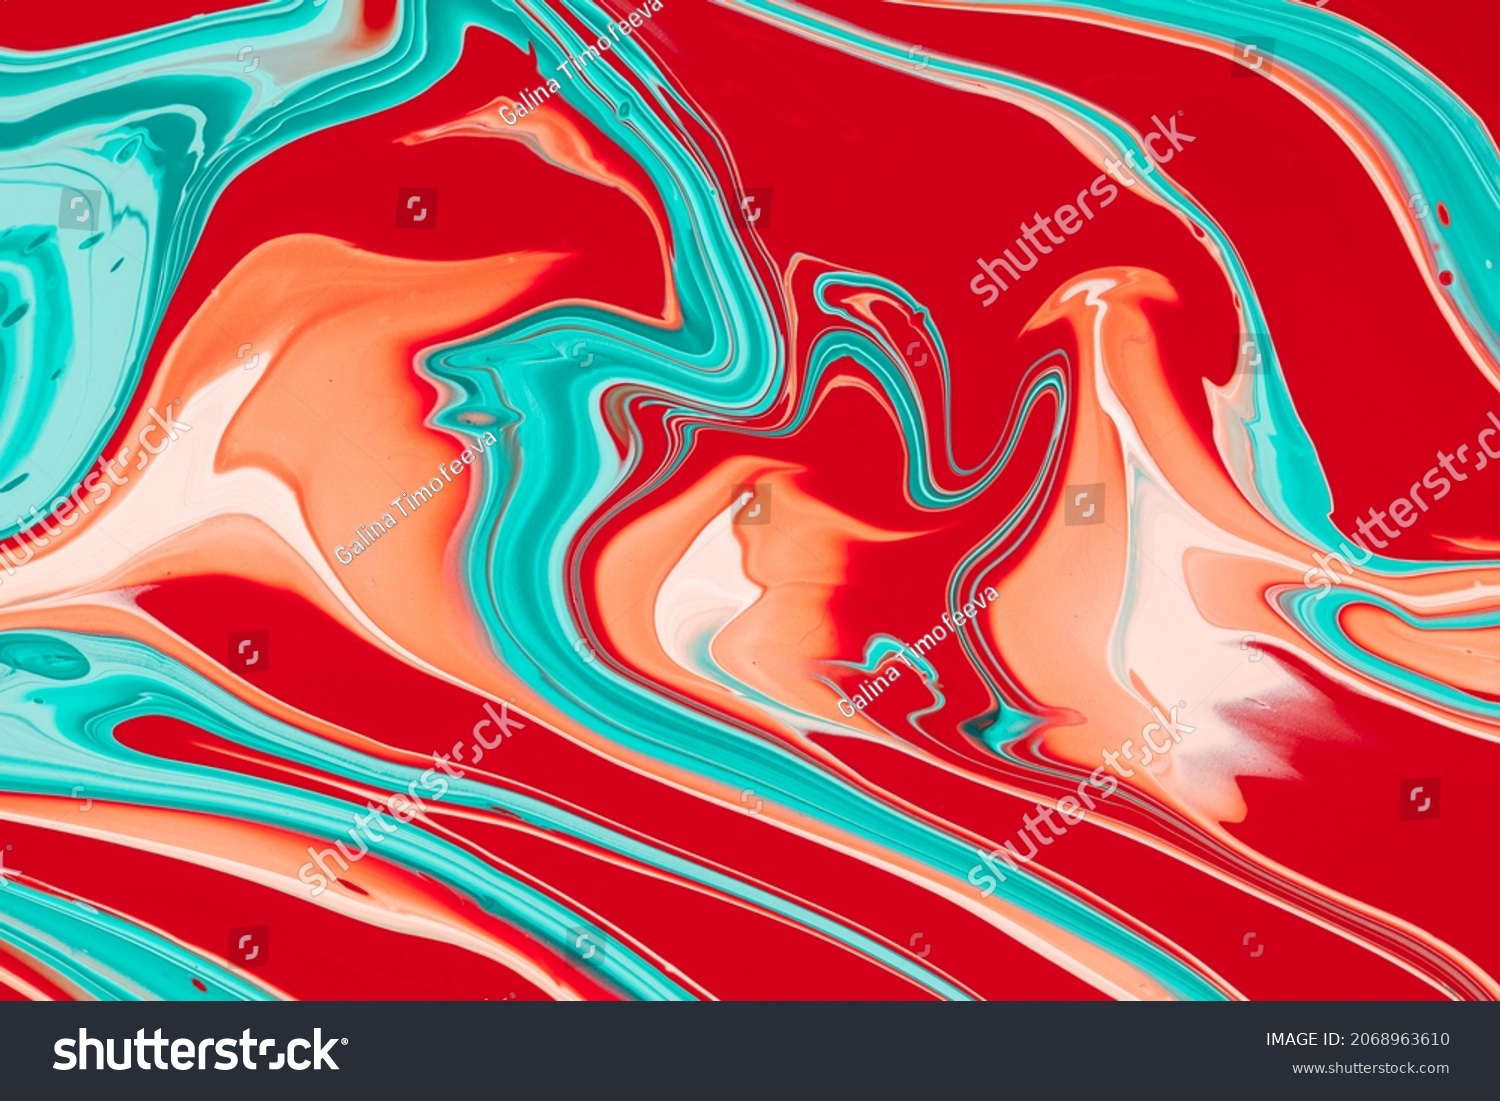 Background with liquid colored swirls and dye blends that flows from top to bottom. Fluid art acrylic texture with colorful waves, mixing paint effect. Abstract backdrop with bright blended colors. #2068963610